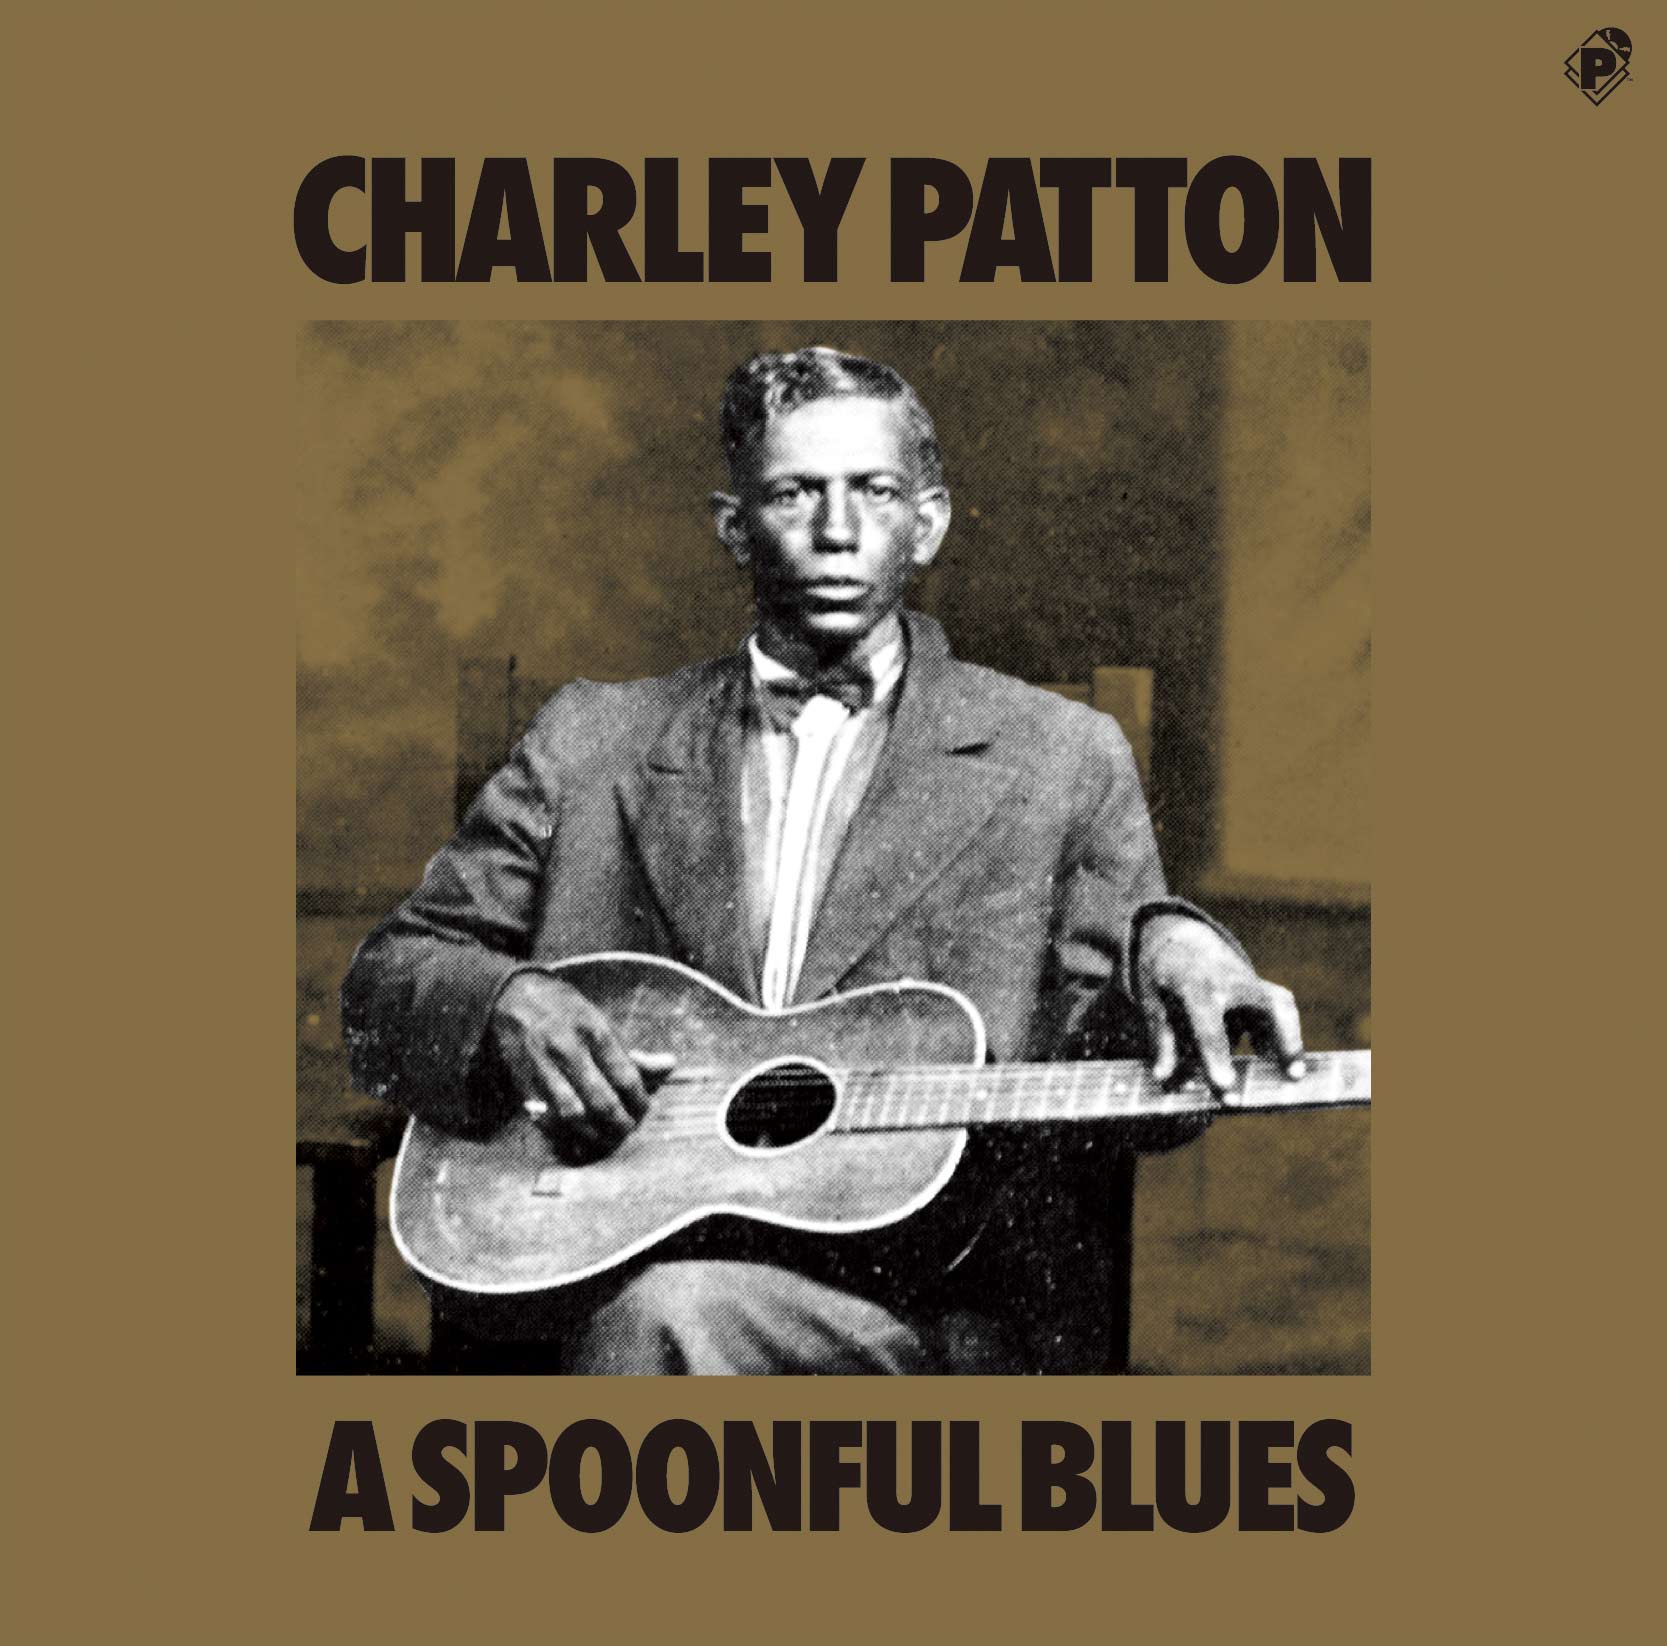 CHARLEY PATTON「A Spoonful Blues」